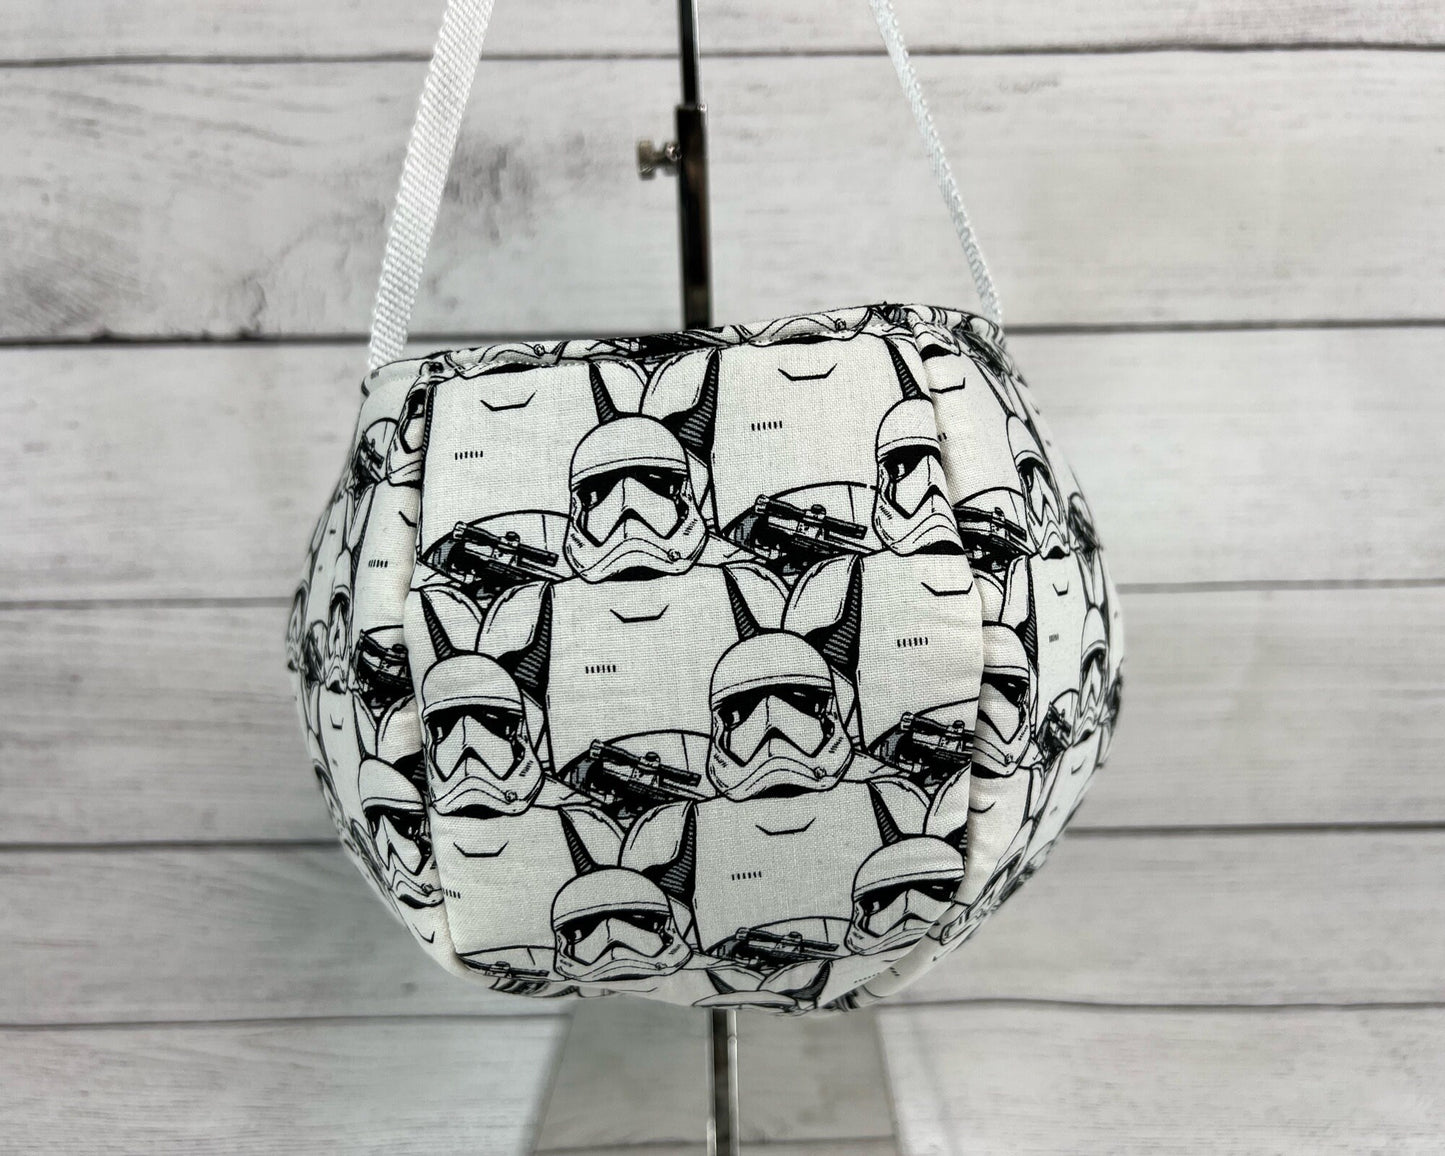 Star Wars Hand-Made Tote Bag - Storm Troopers - Dark Side - Gift - Everyday - Easter - Holiday - Halloween